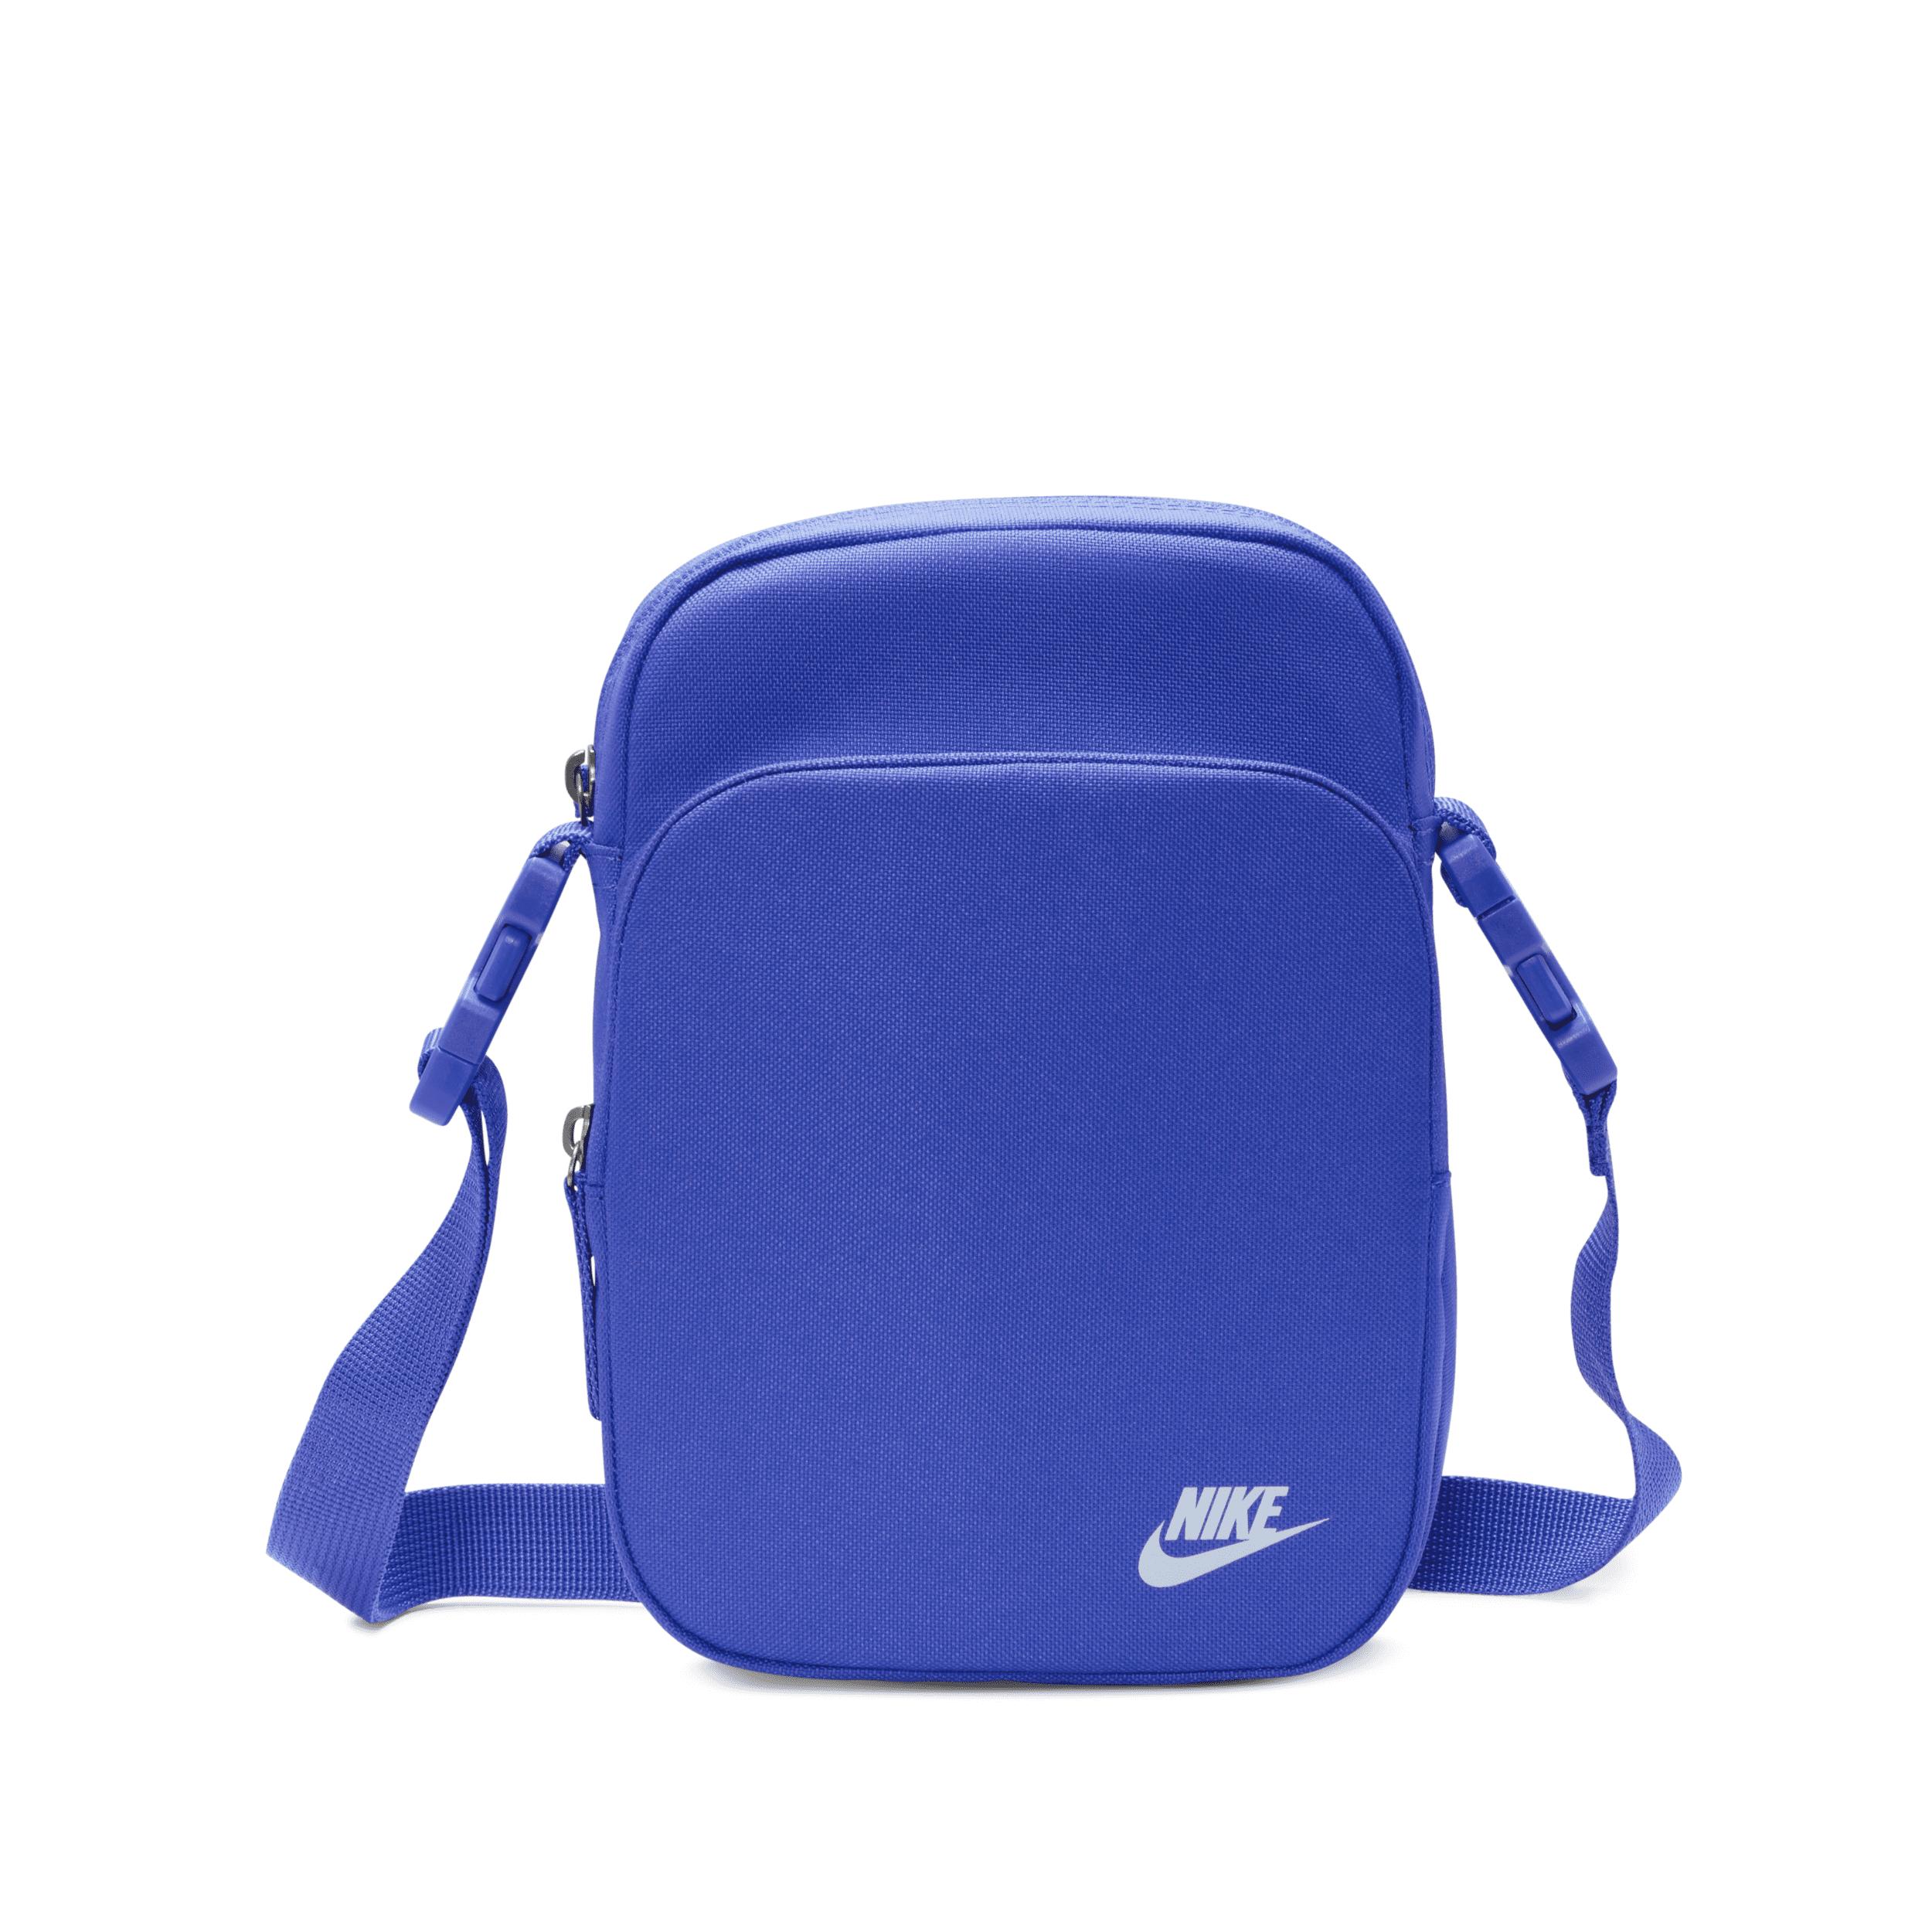 Nike Sports Bag in Mumbai at best price by Asian Creations - Justdial